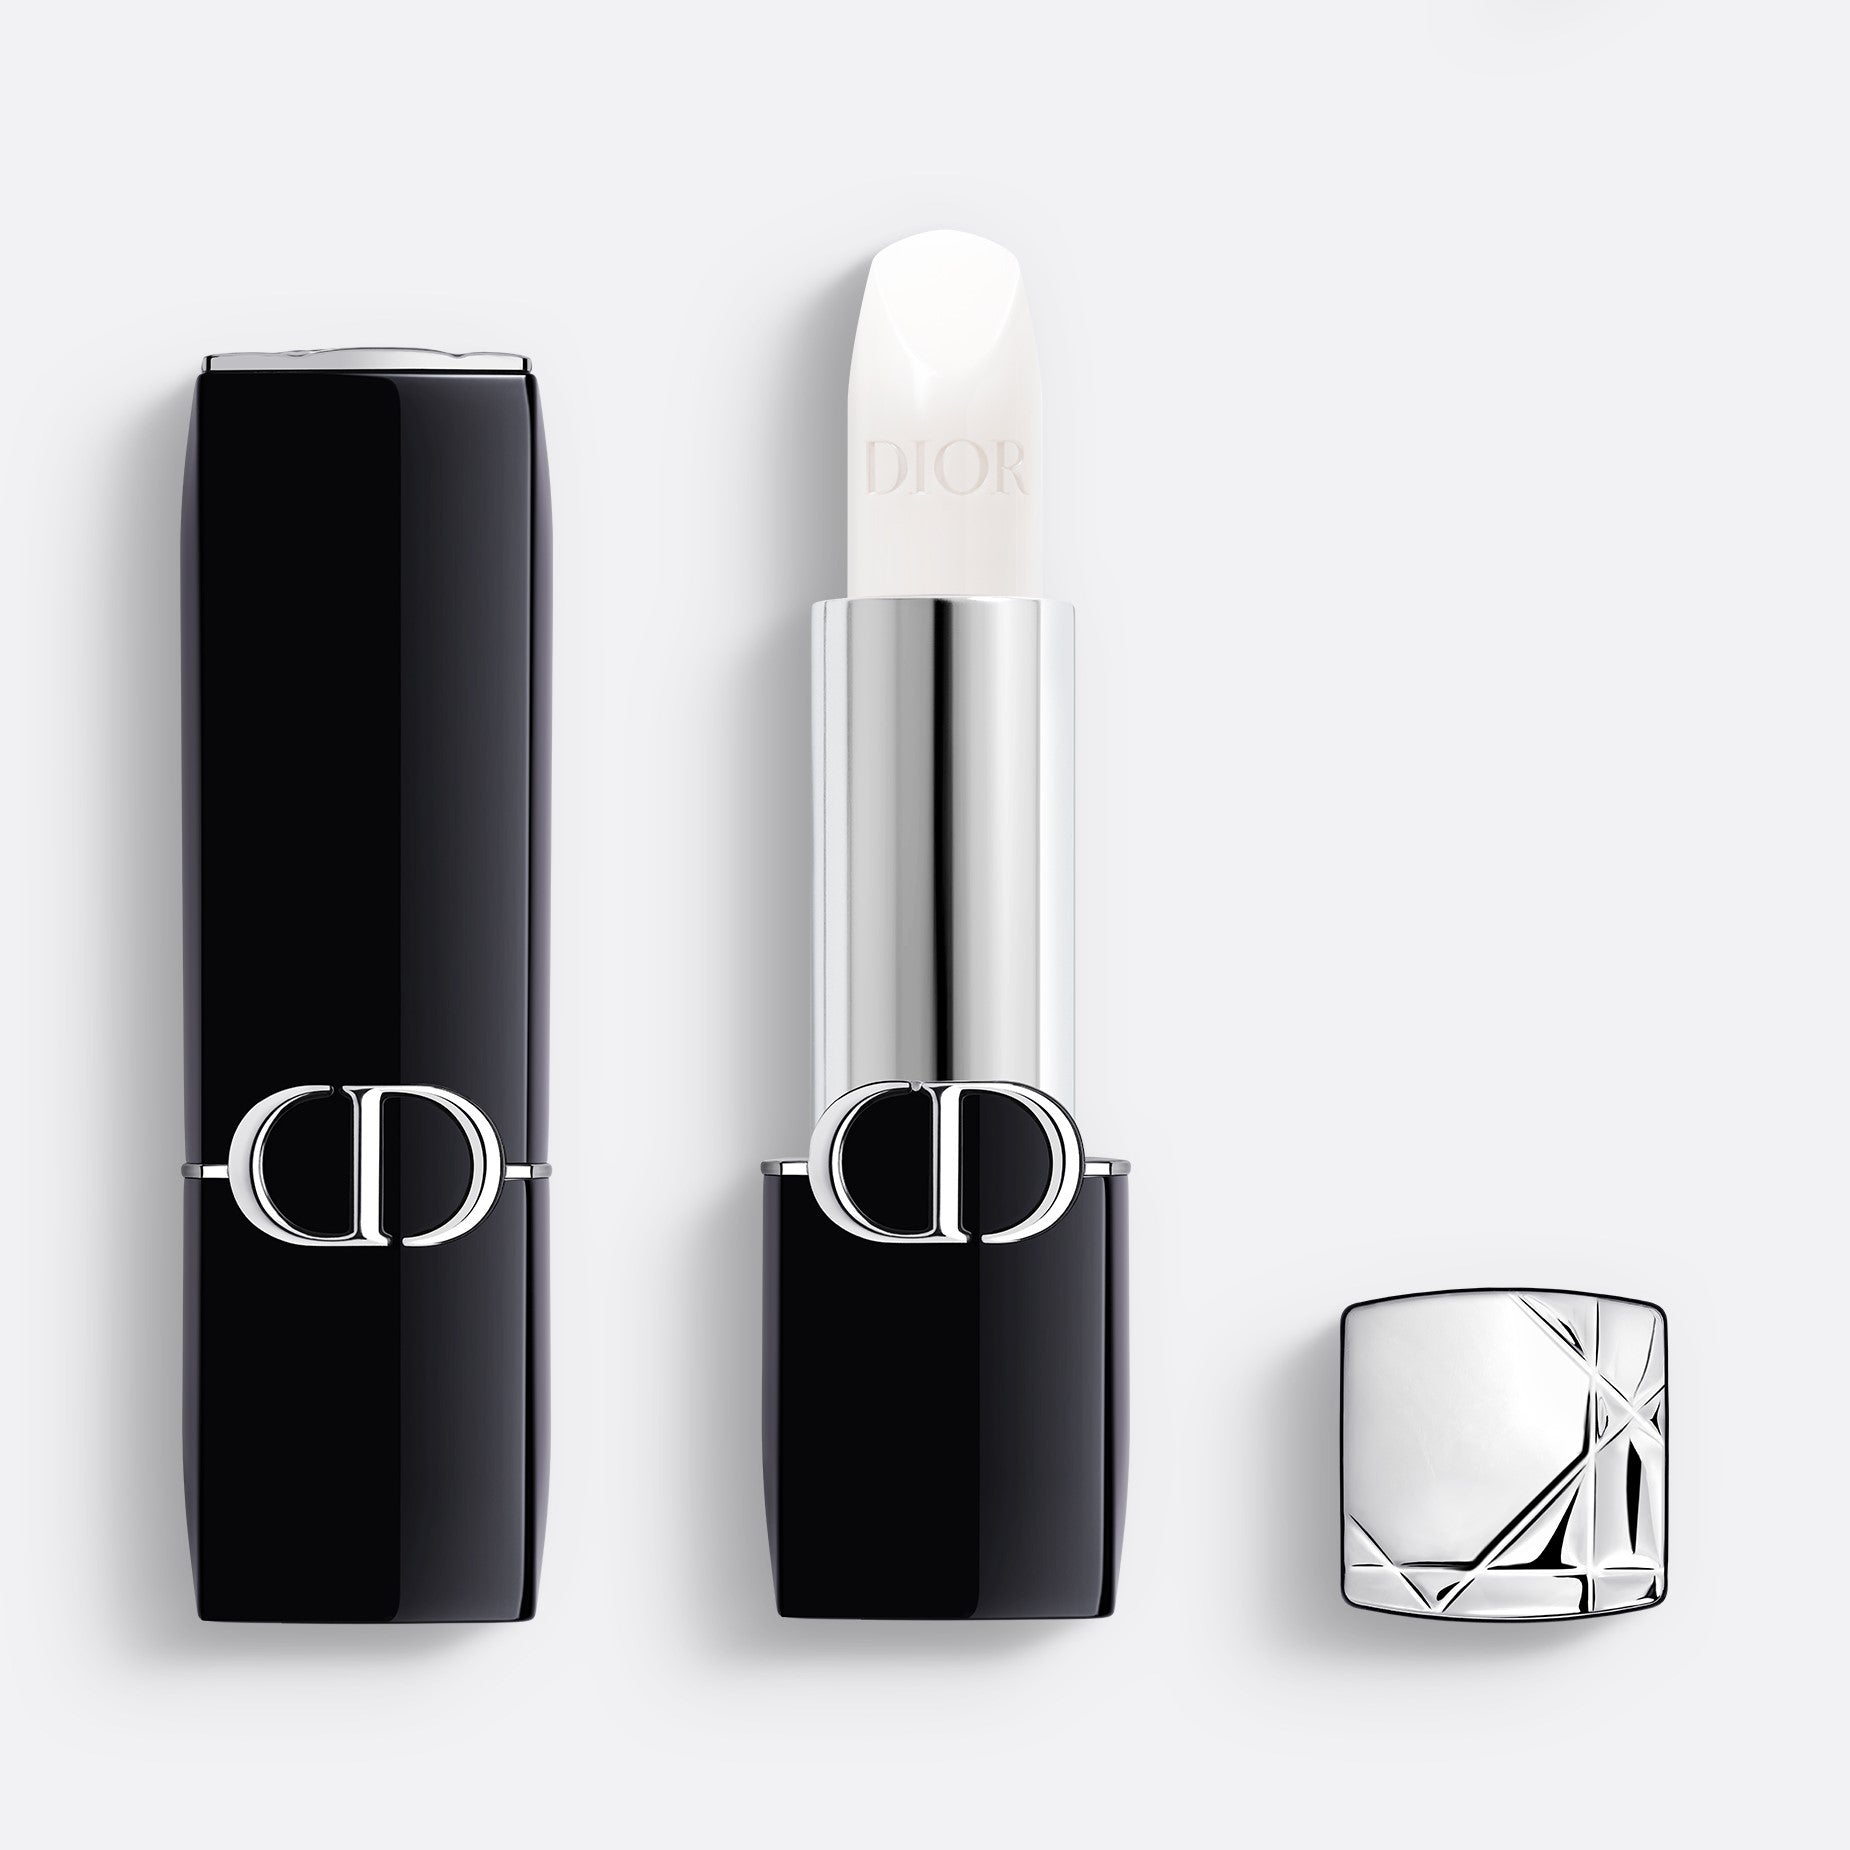 ROUGE DIOR COLORED LIP BALM | Couture Colour Lipstick - Velvet and Satin Finishes - Hydrating Floral Lip Care - Long Wear